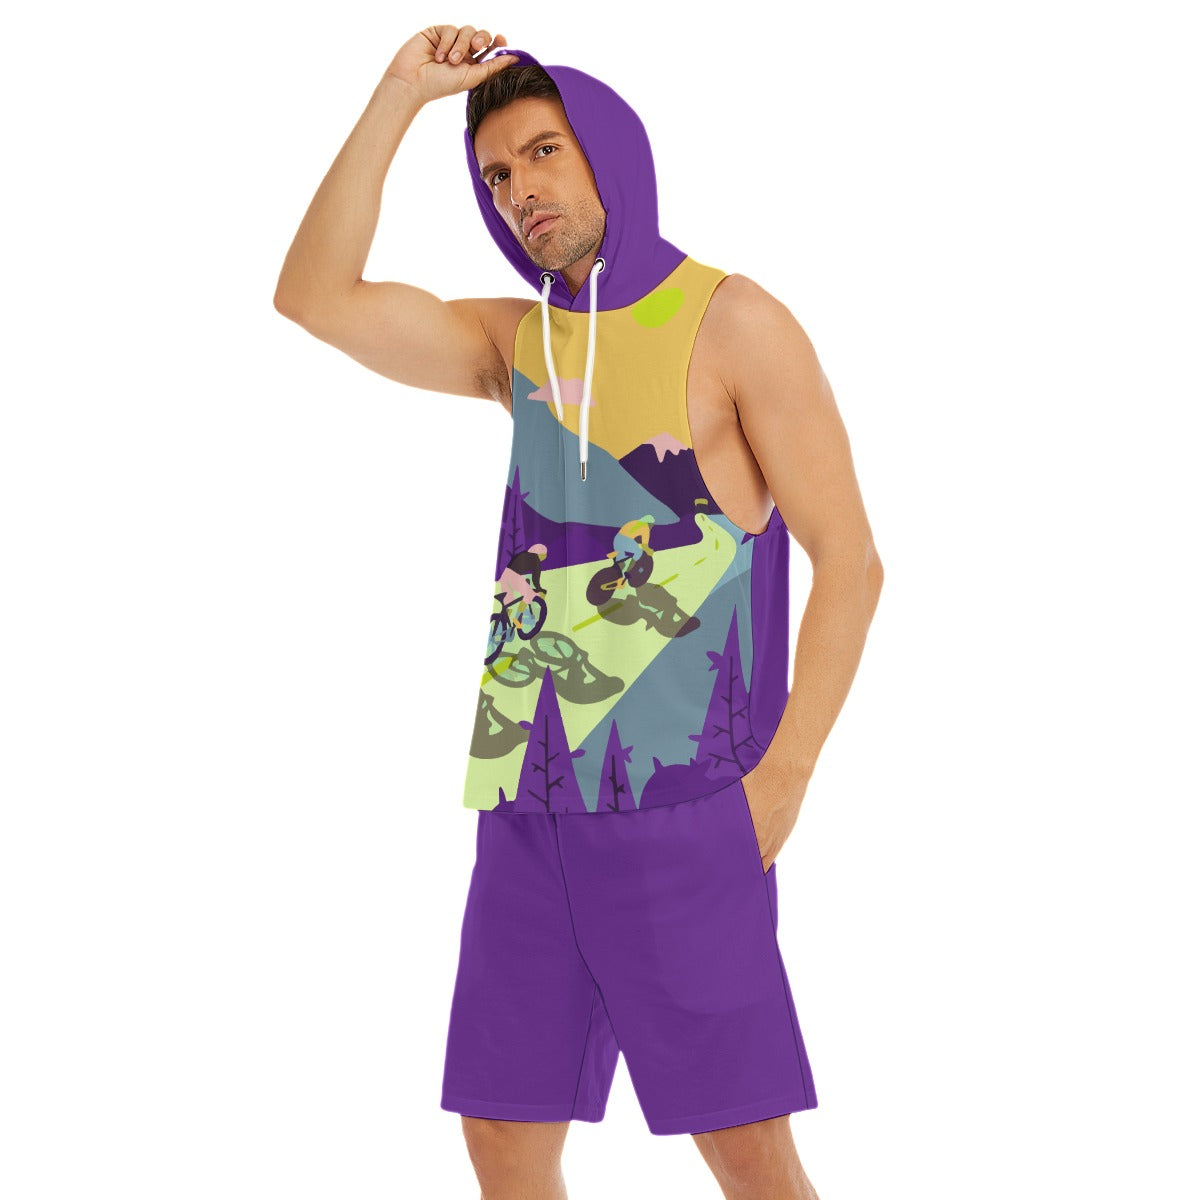 Racing to the Peak Sleeveless semi stringer hooded tank And Shorts Sets